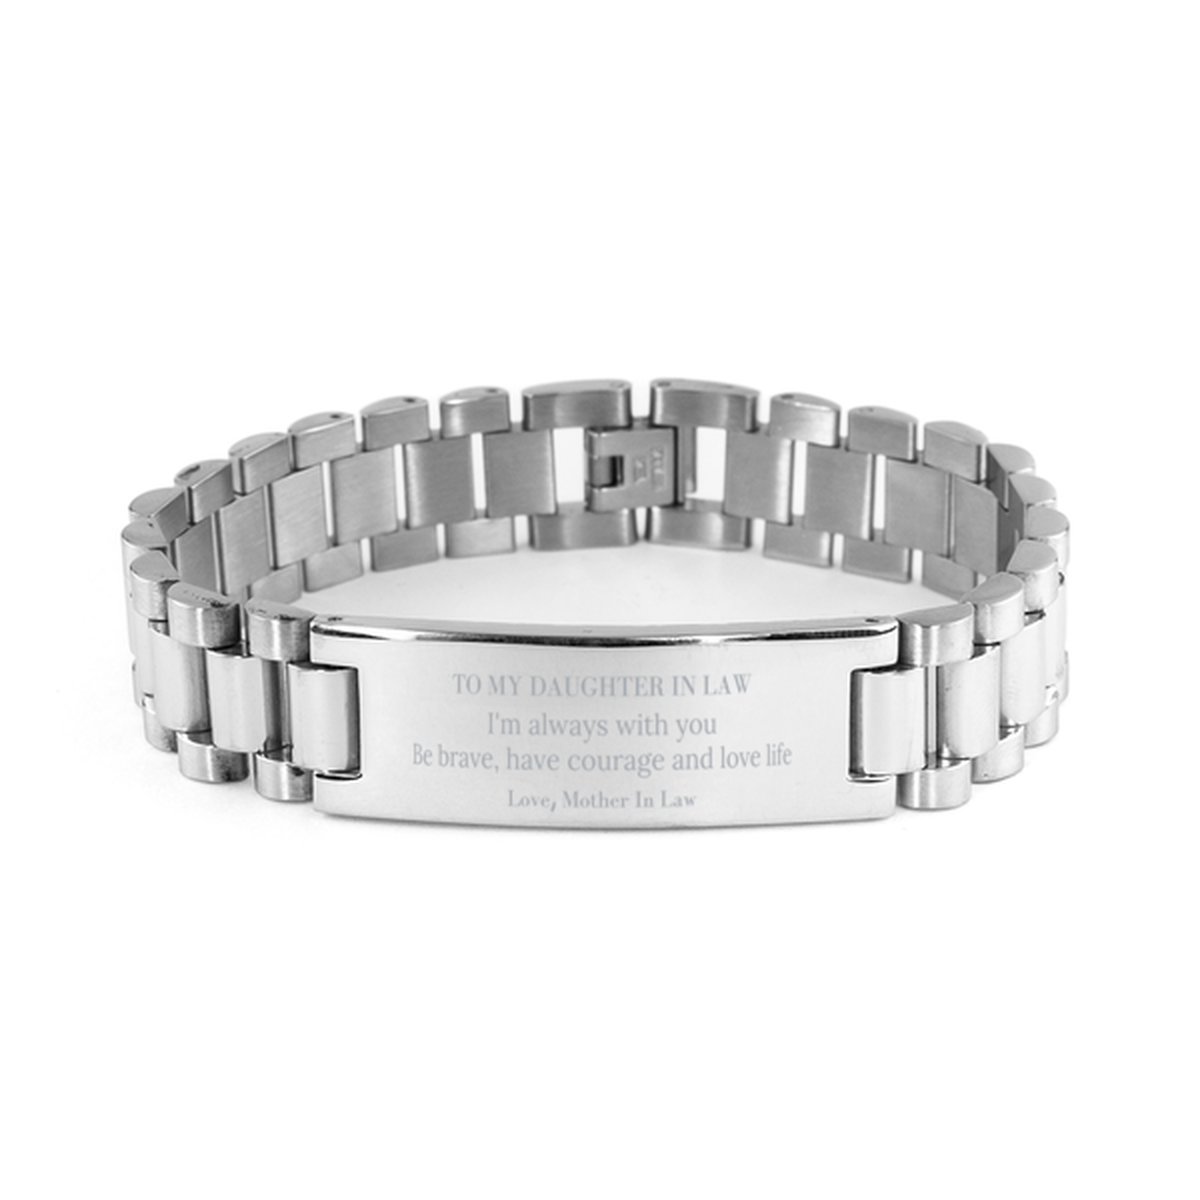 To My Daughter In Law Gifts from Mother In Law, Unique Ladder Stainless Steel Bracelet Inspirational Christmas Birthday Graduation Gifts for Daughter In Law I'm always with you. Be brave, have courage and love life. Love, Mother In Law